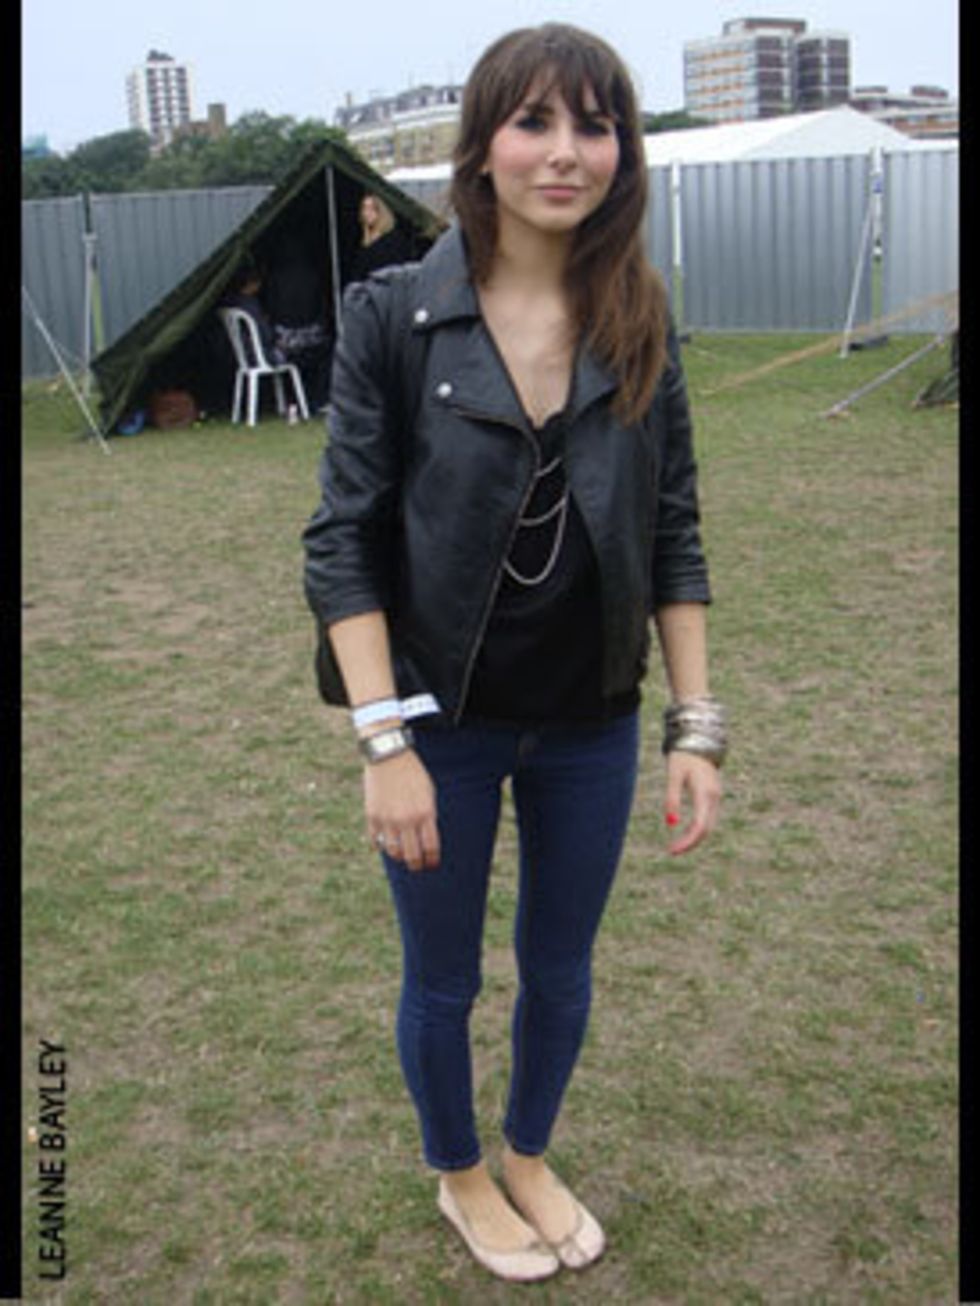 <p>Lisa Kharas, 19, wearing Jeans from Topshop, camisole from Marks and Spencer, a Vintage bag and ballet pumps also from Topshop.</p>